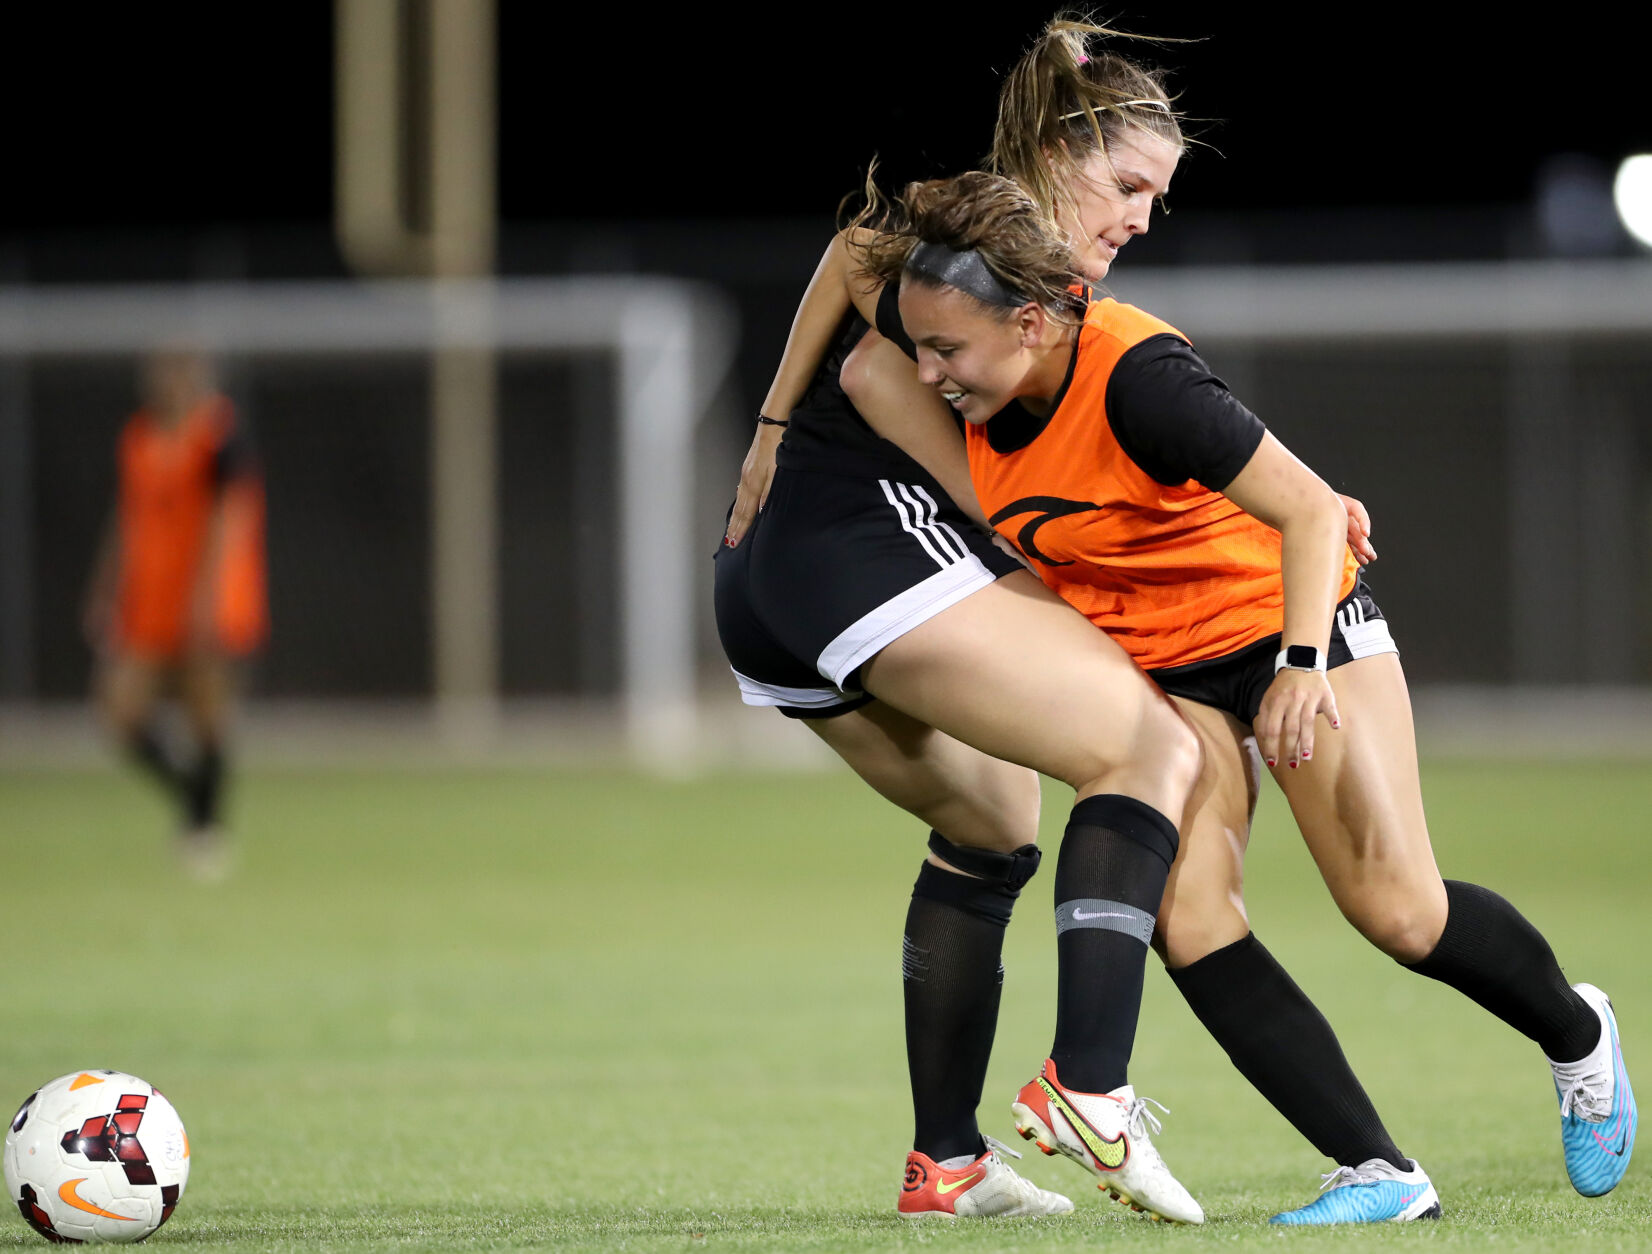 Pima County Surf U21 thriving in first season of WPSL play pic